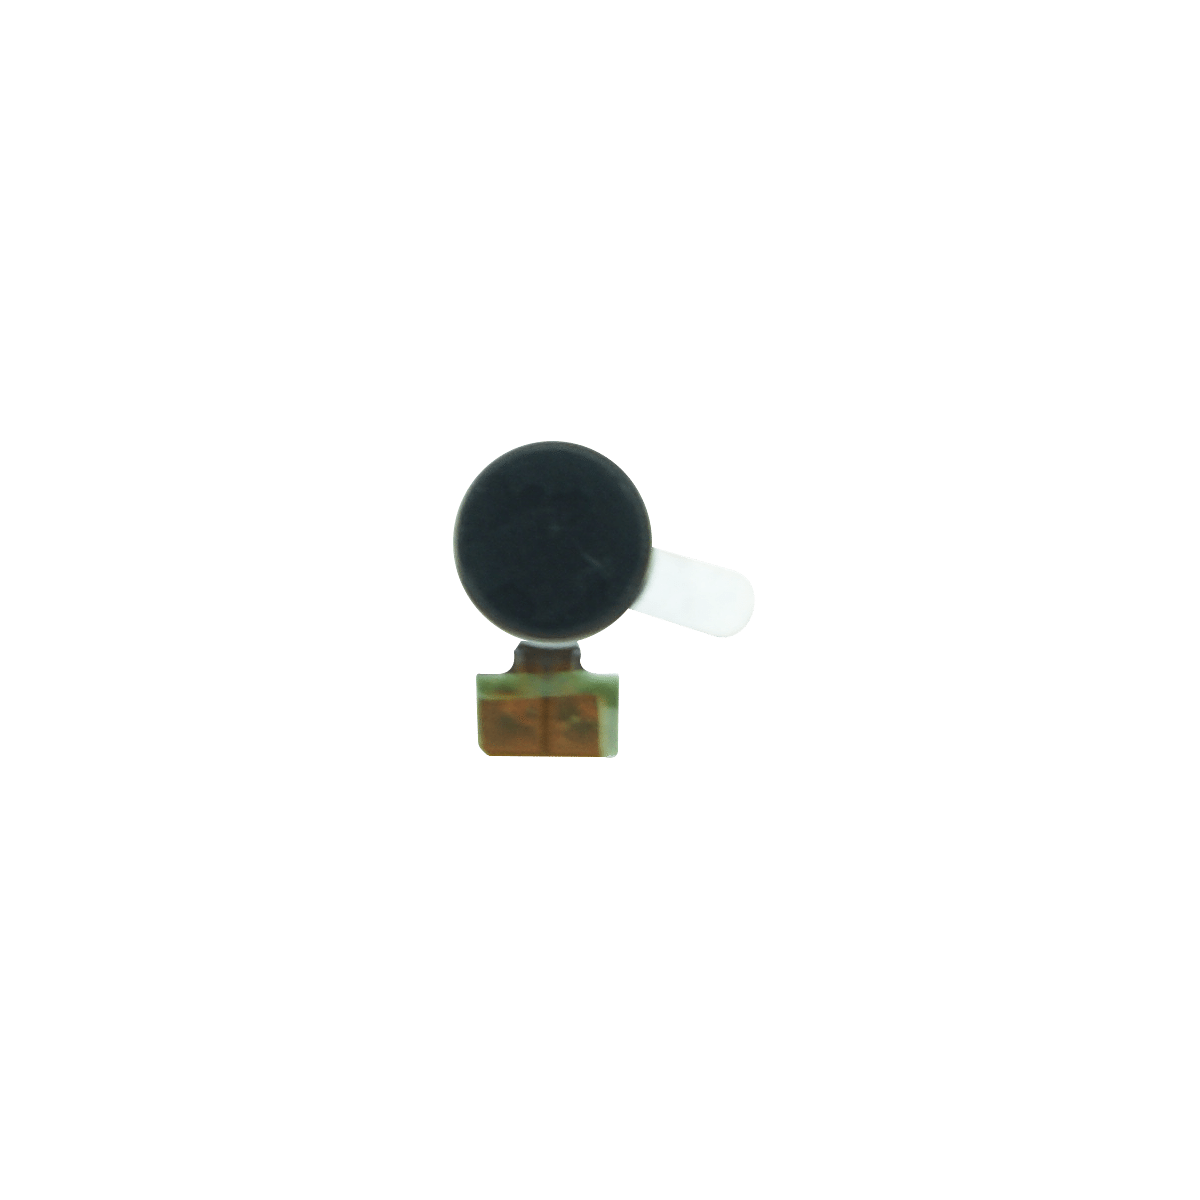 Samsung Galaxy S6 Vibrate Motor Replacement